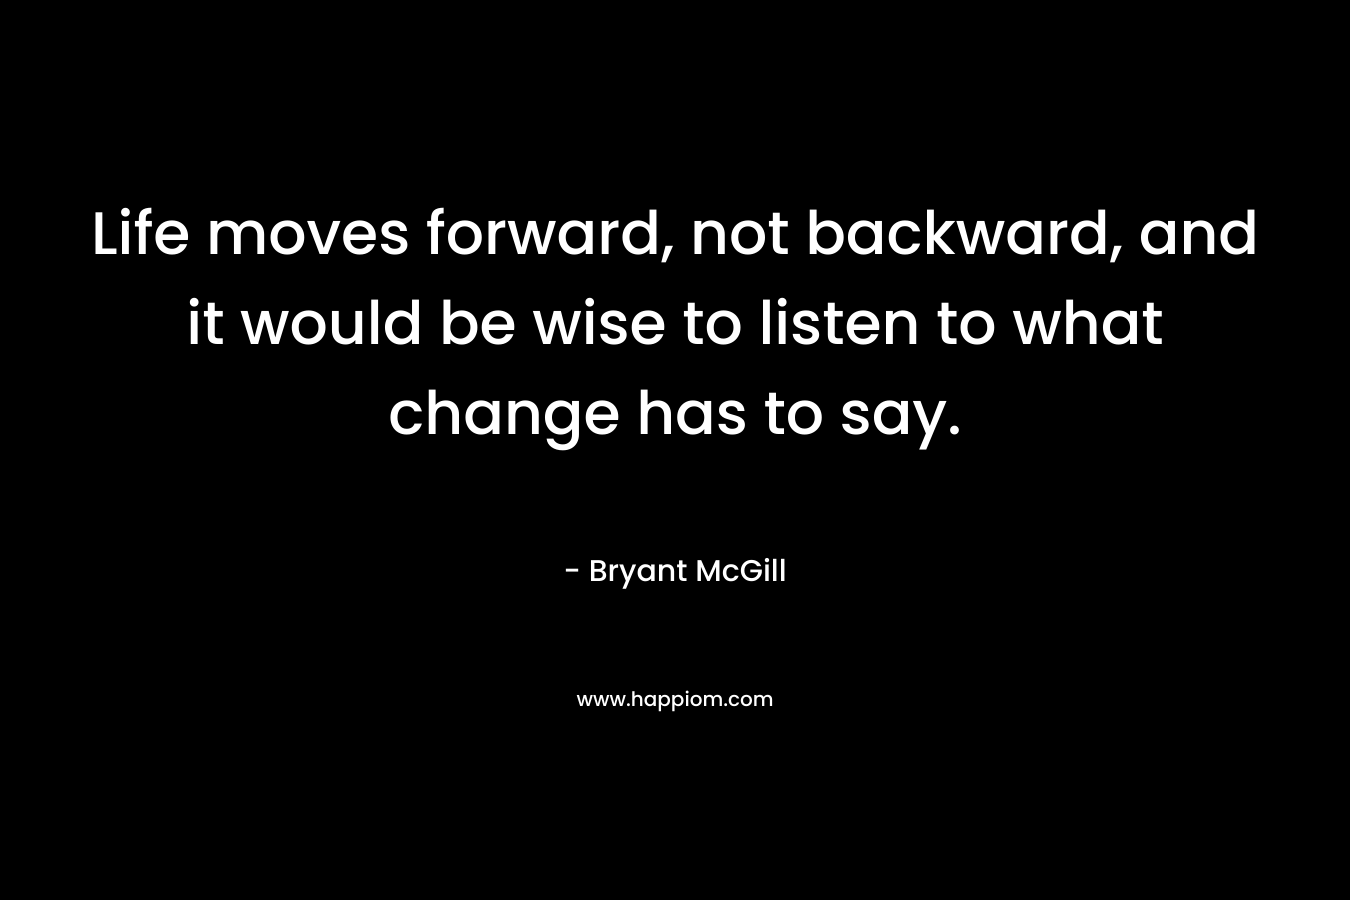 Life moves forward, not backward, and it would be wise to listen to what change has to say.